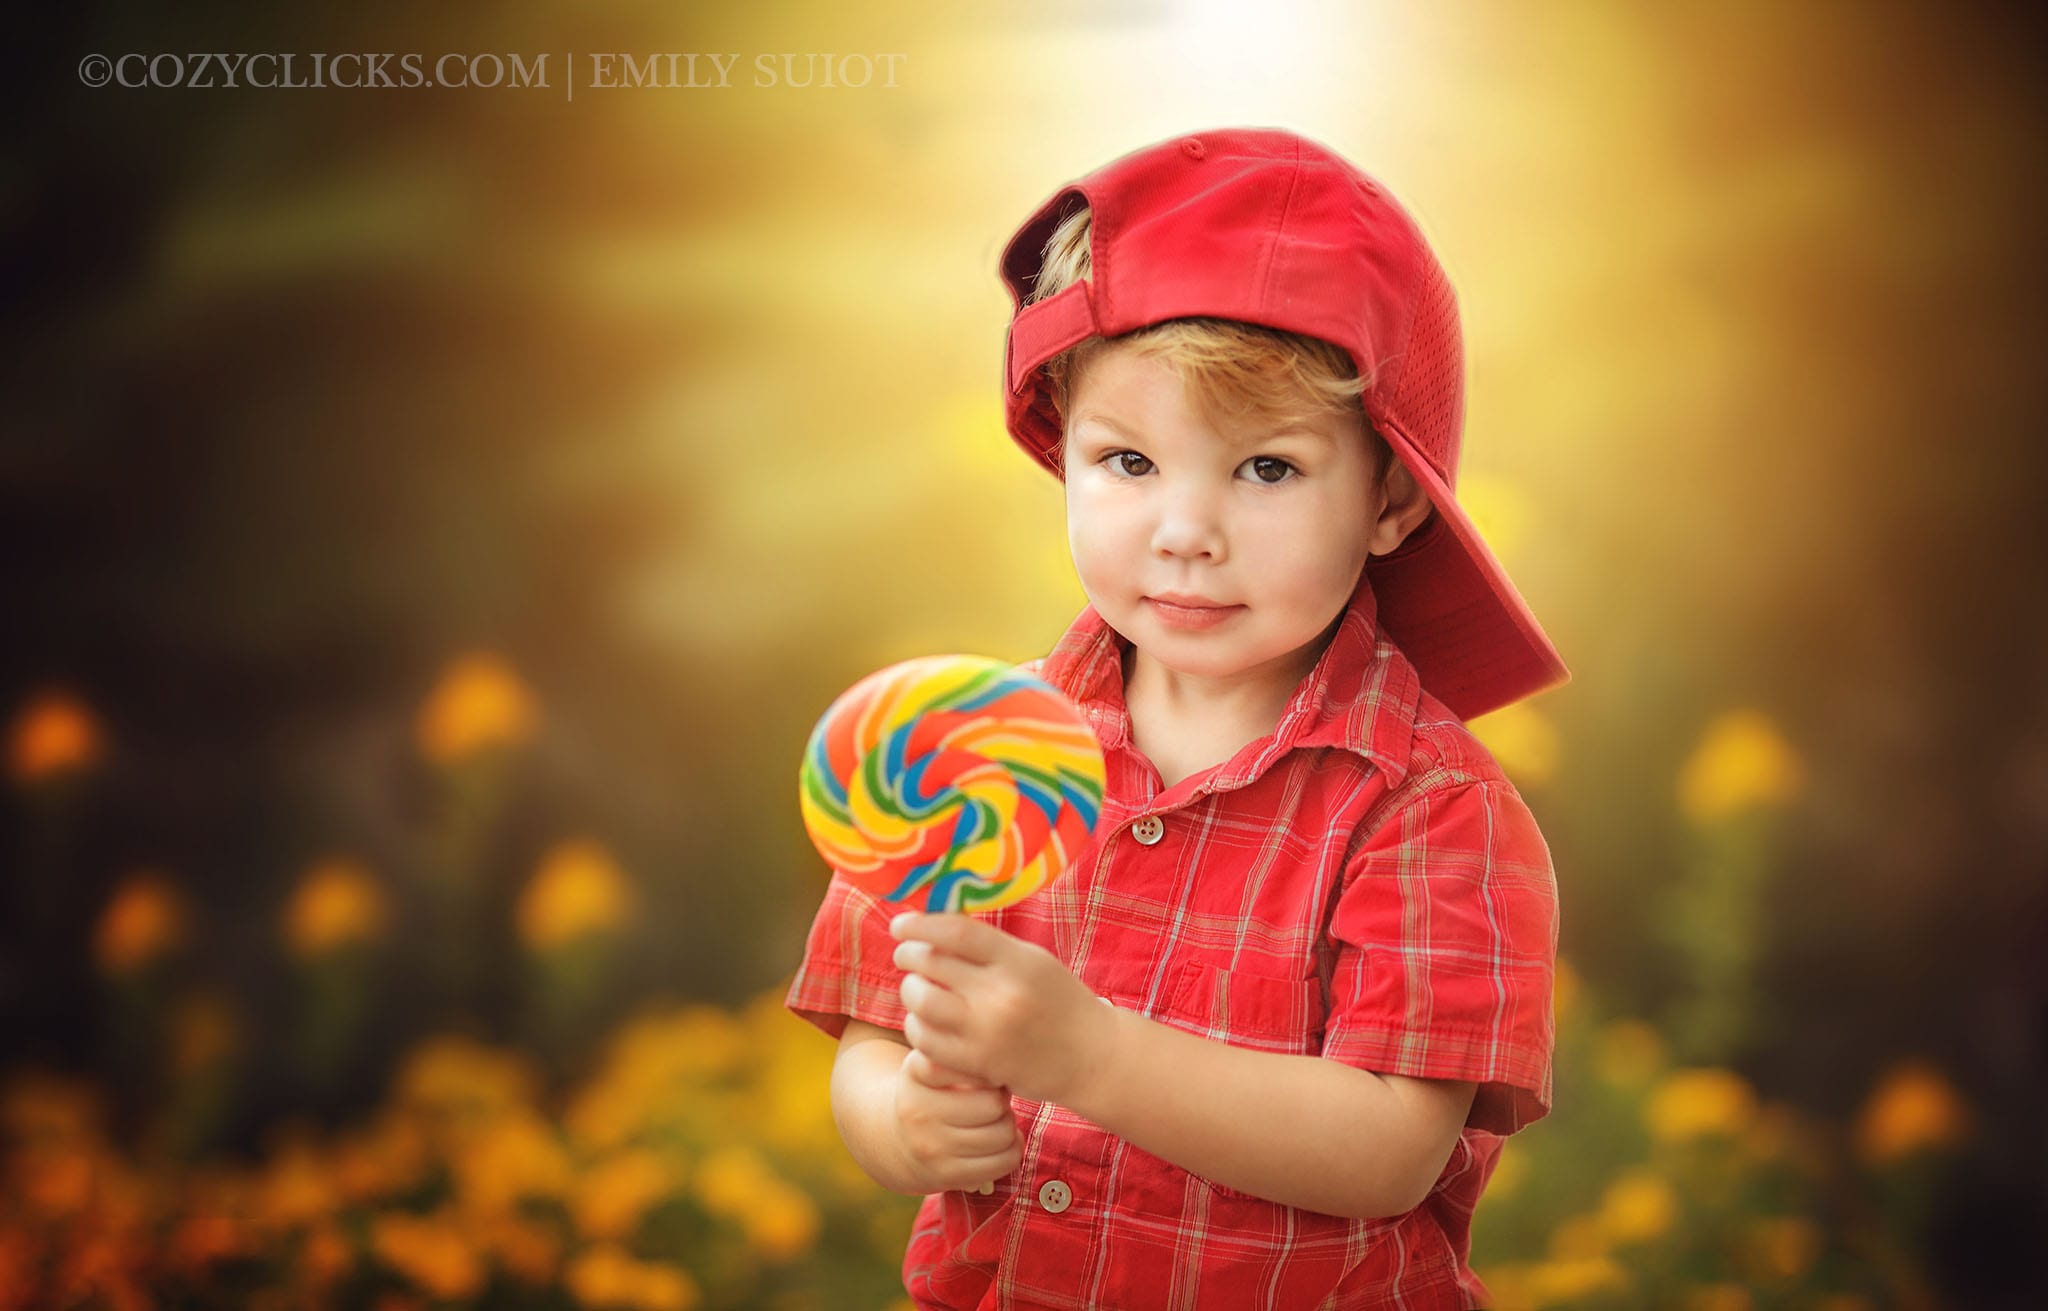 Cute smile of two year old boy with his lollipop for two year old portrait photos